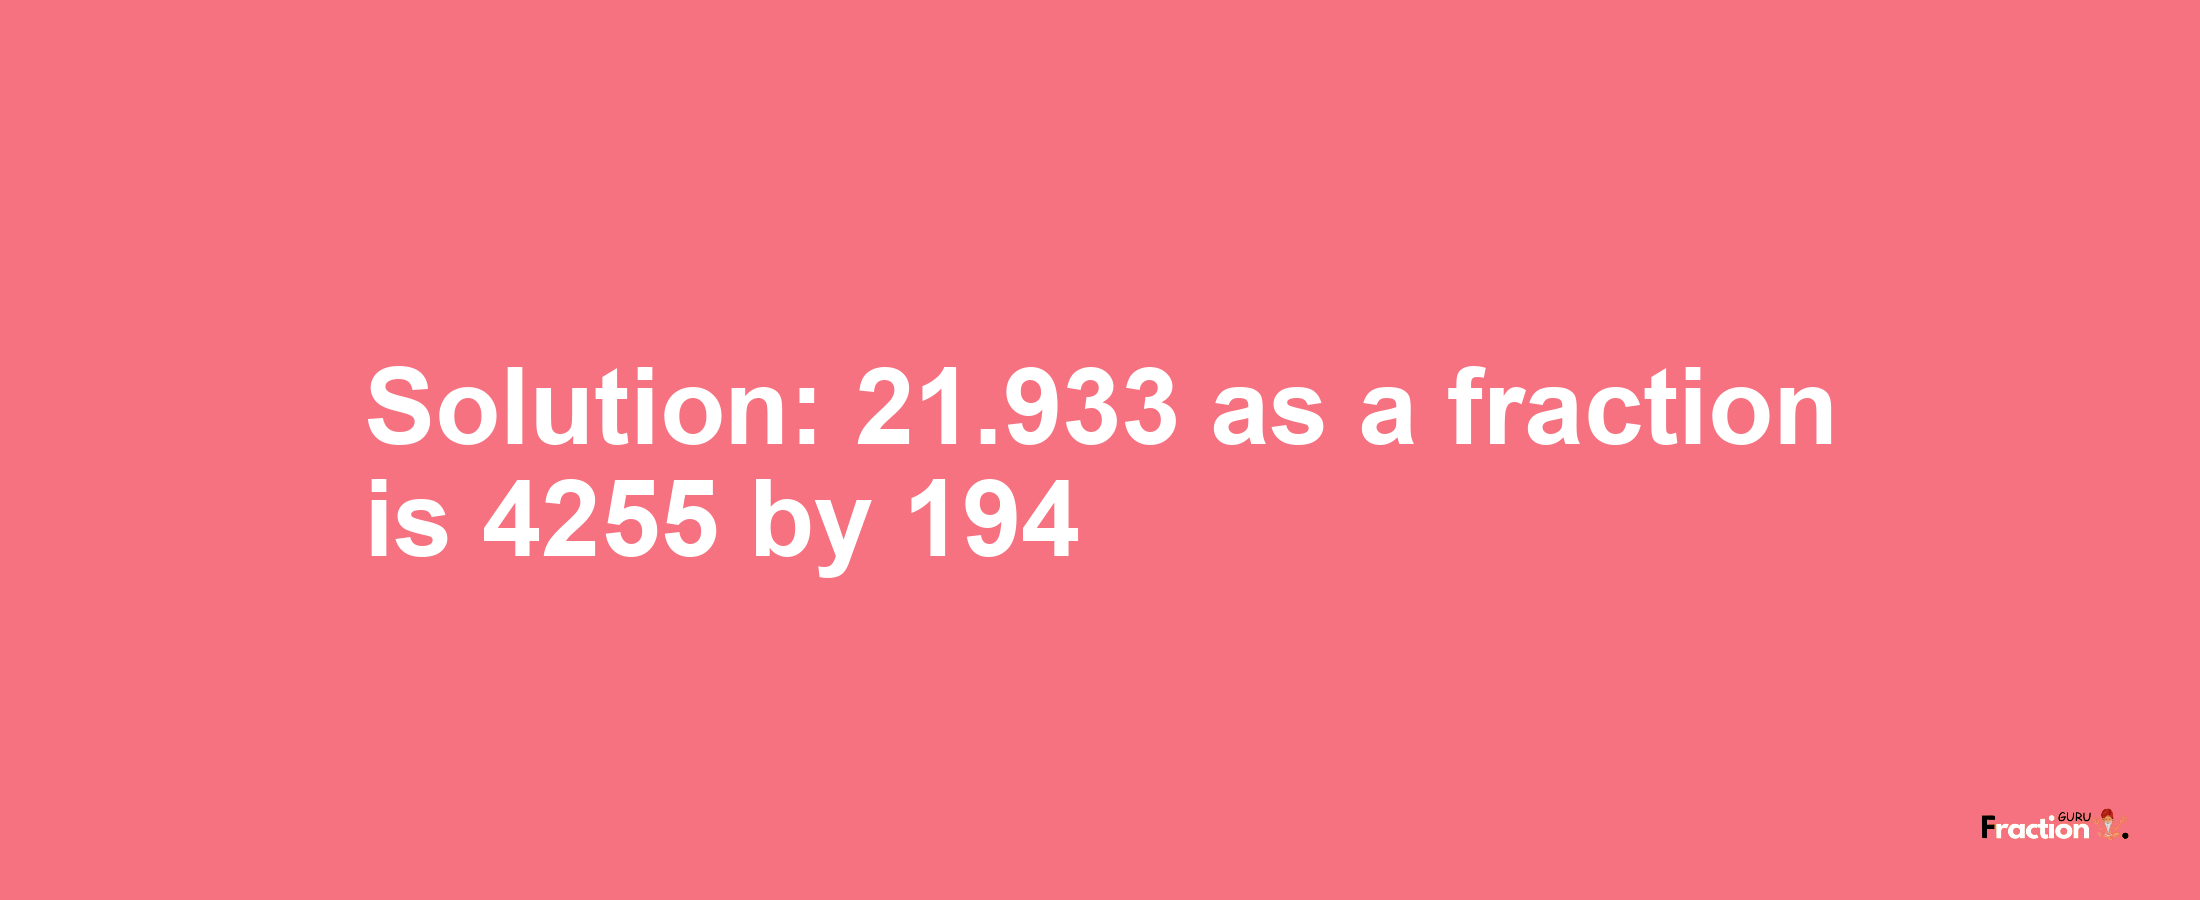 Solution:21.933 as a fraction is 4255/194